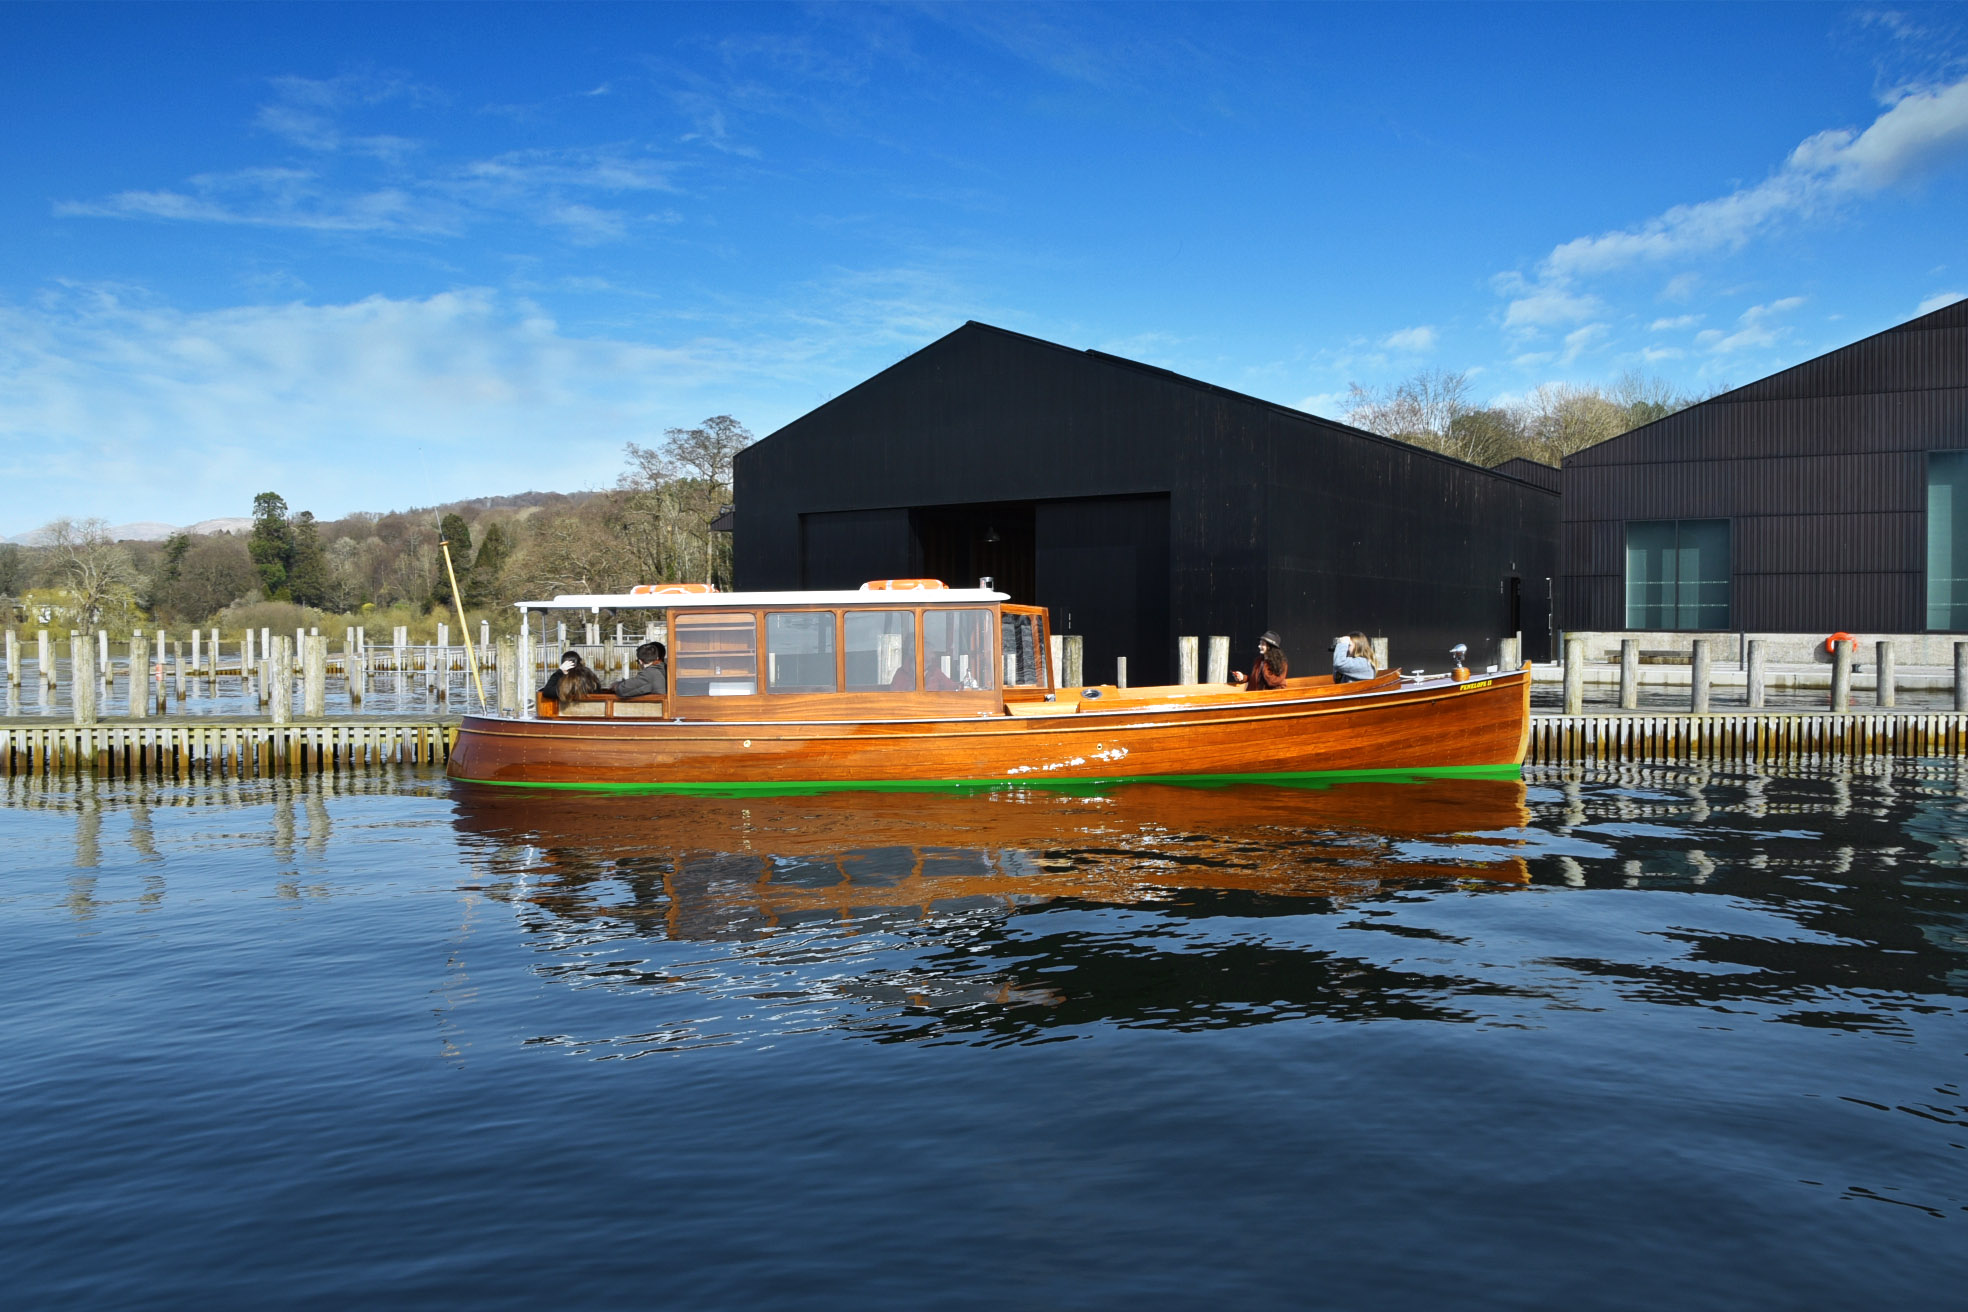 Restored historic wooden boat Penelope II on the water at Windermere Jetty Museum